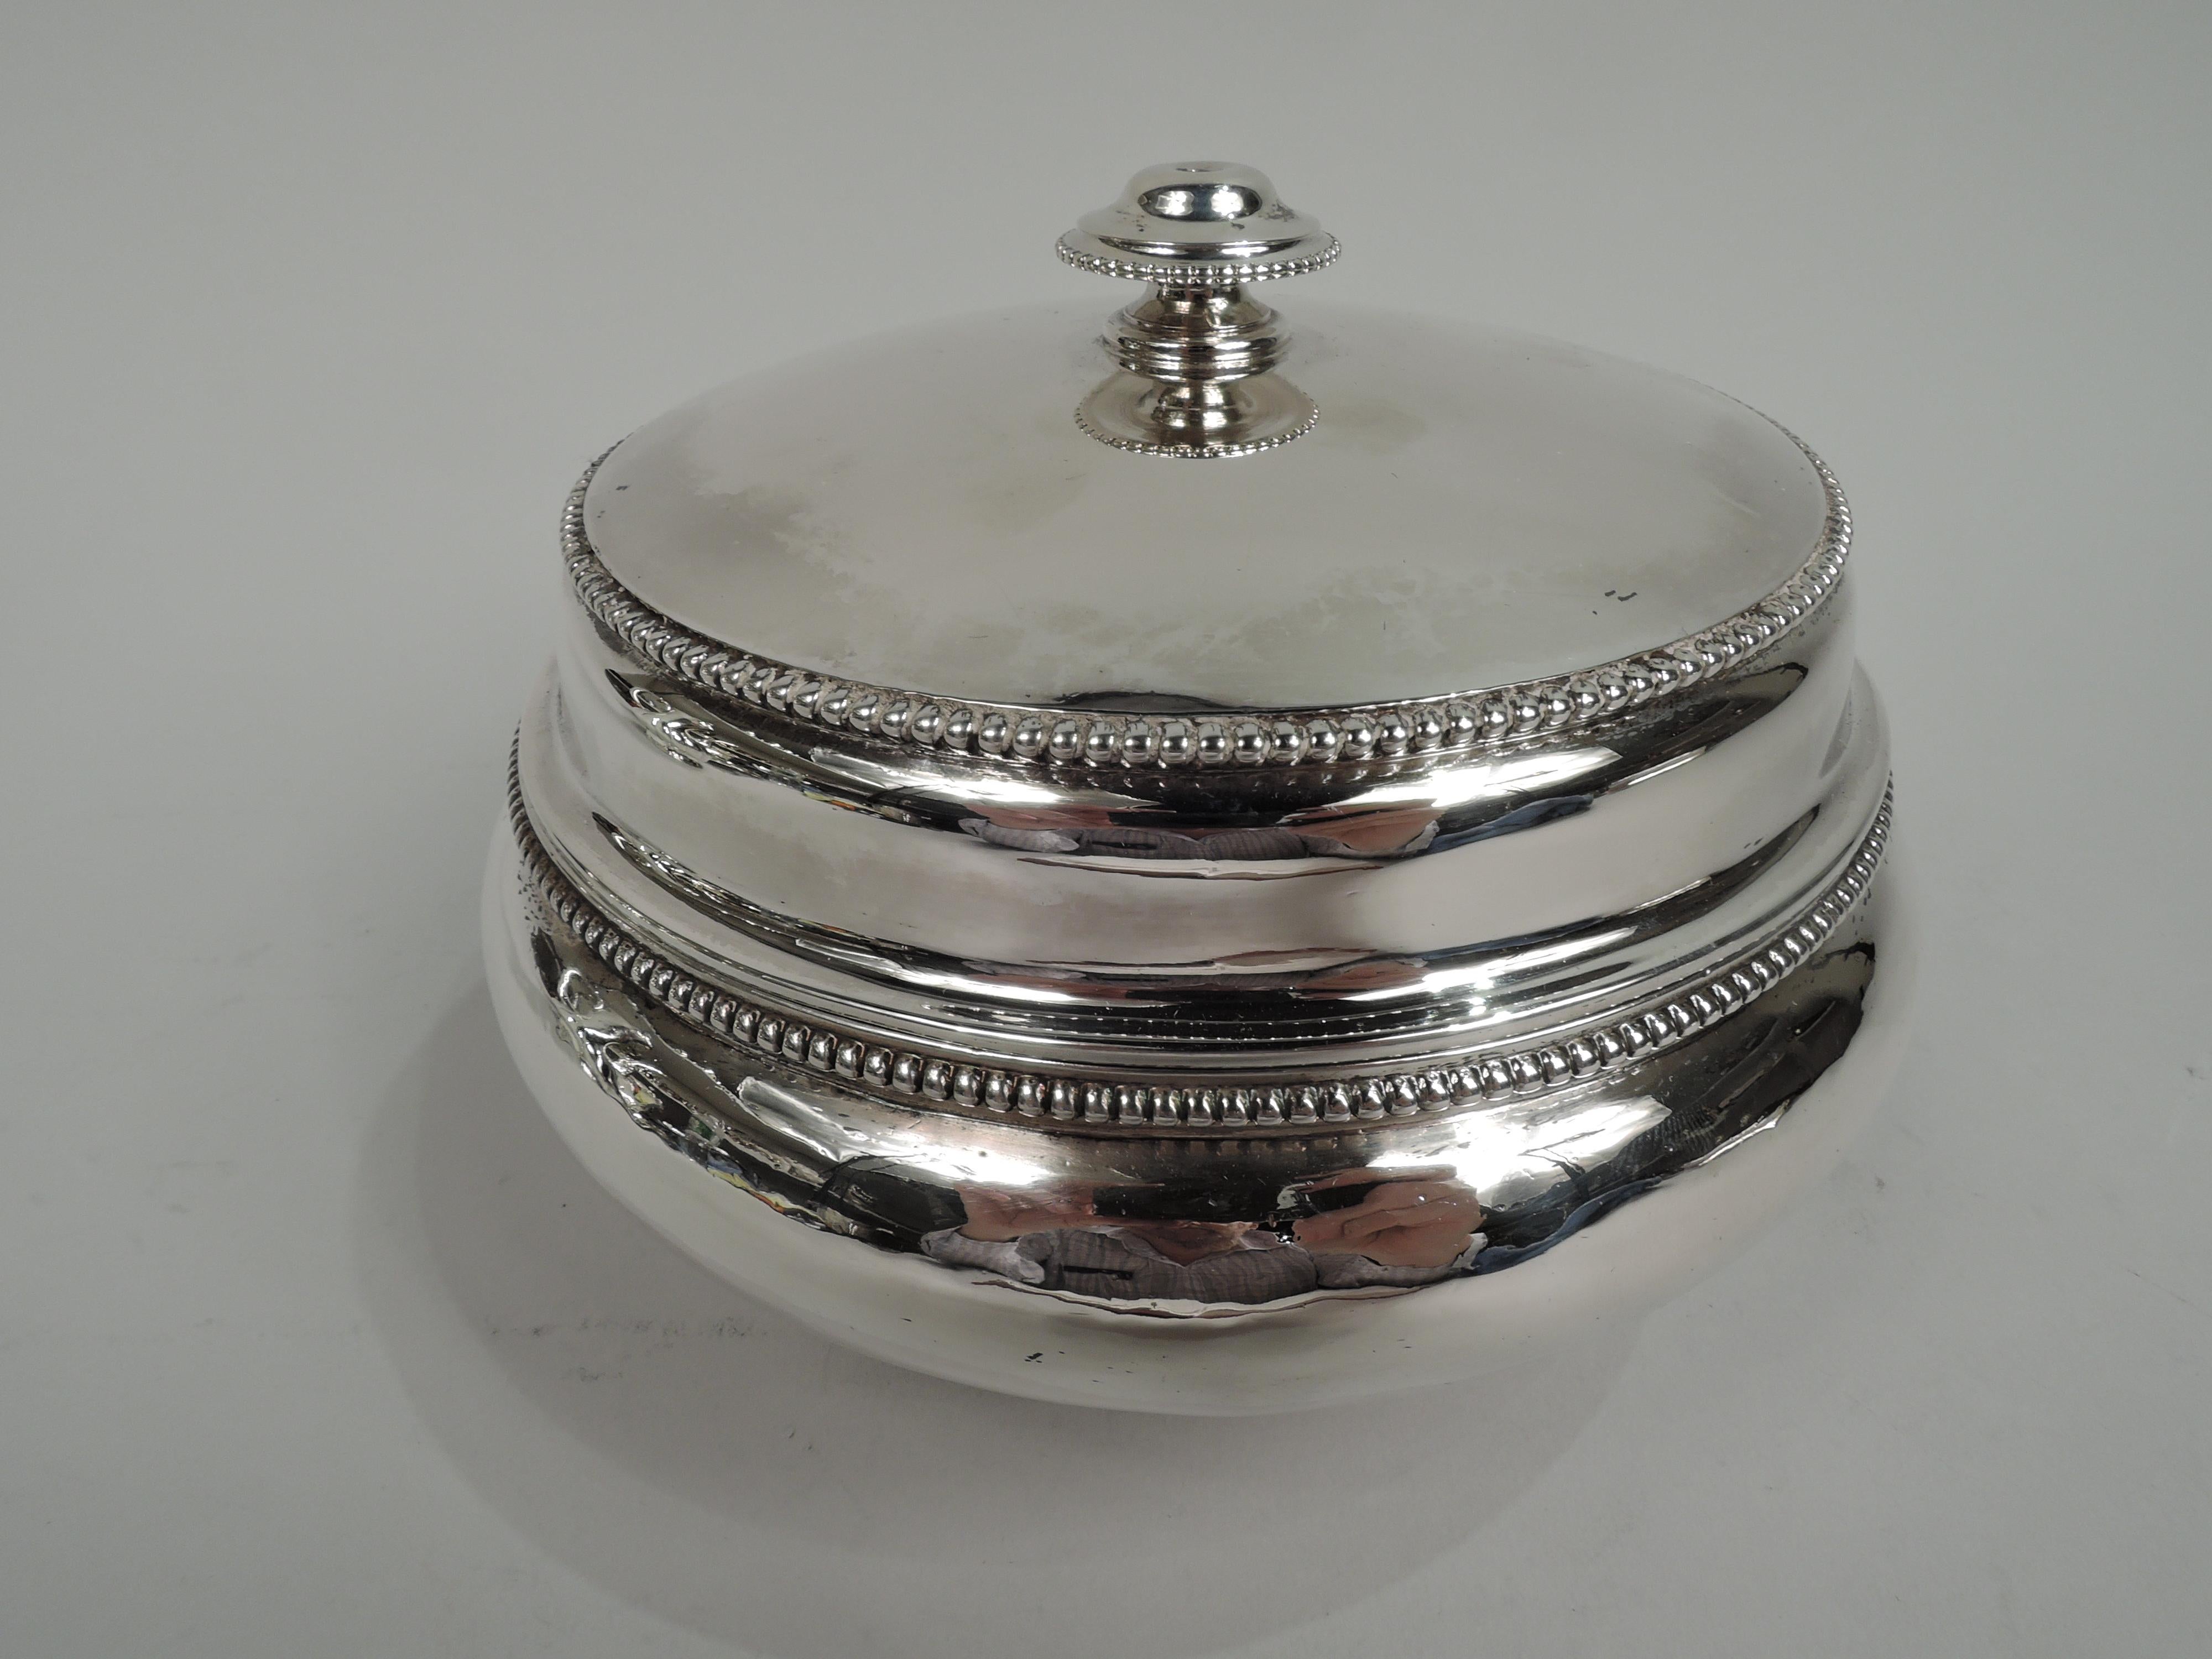 Classical sterling silver bowl. Made by Edward C. Moore for Tiffany & Co. at 550 Broadway in New York, ca 1860. Bellied on stepped and spread foot. Cover raised with tapering side and finial. Beading. Handwork visible on interior. Early maker’s and